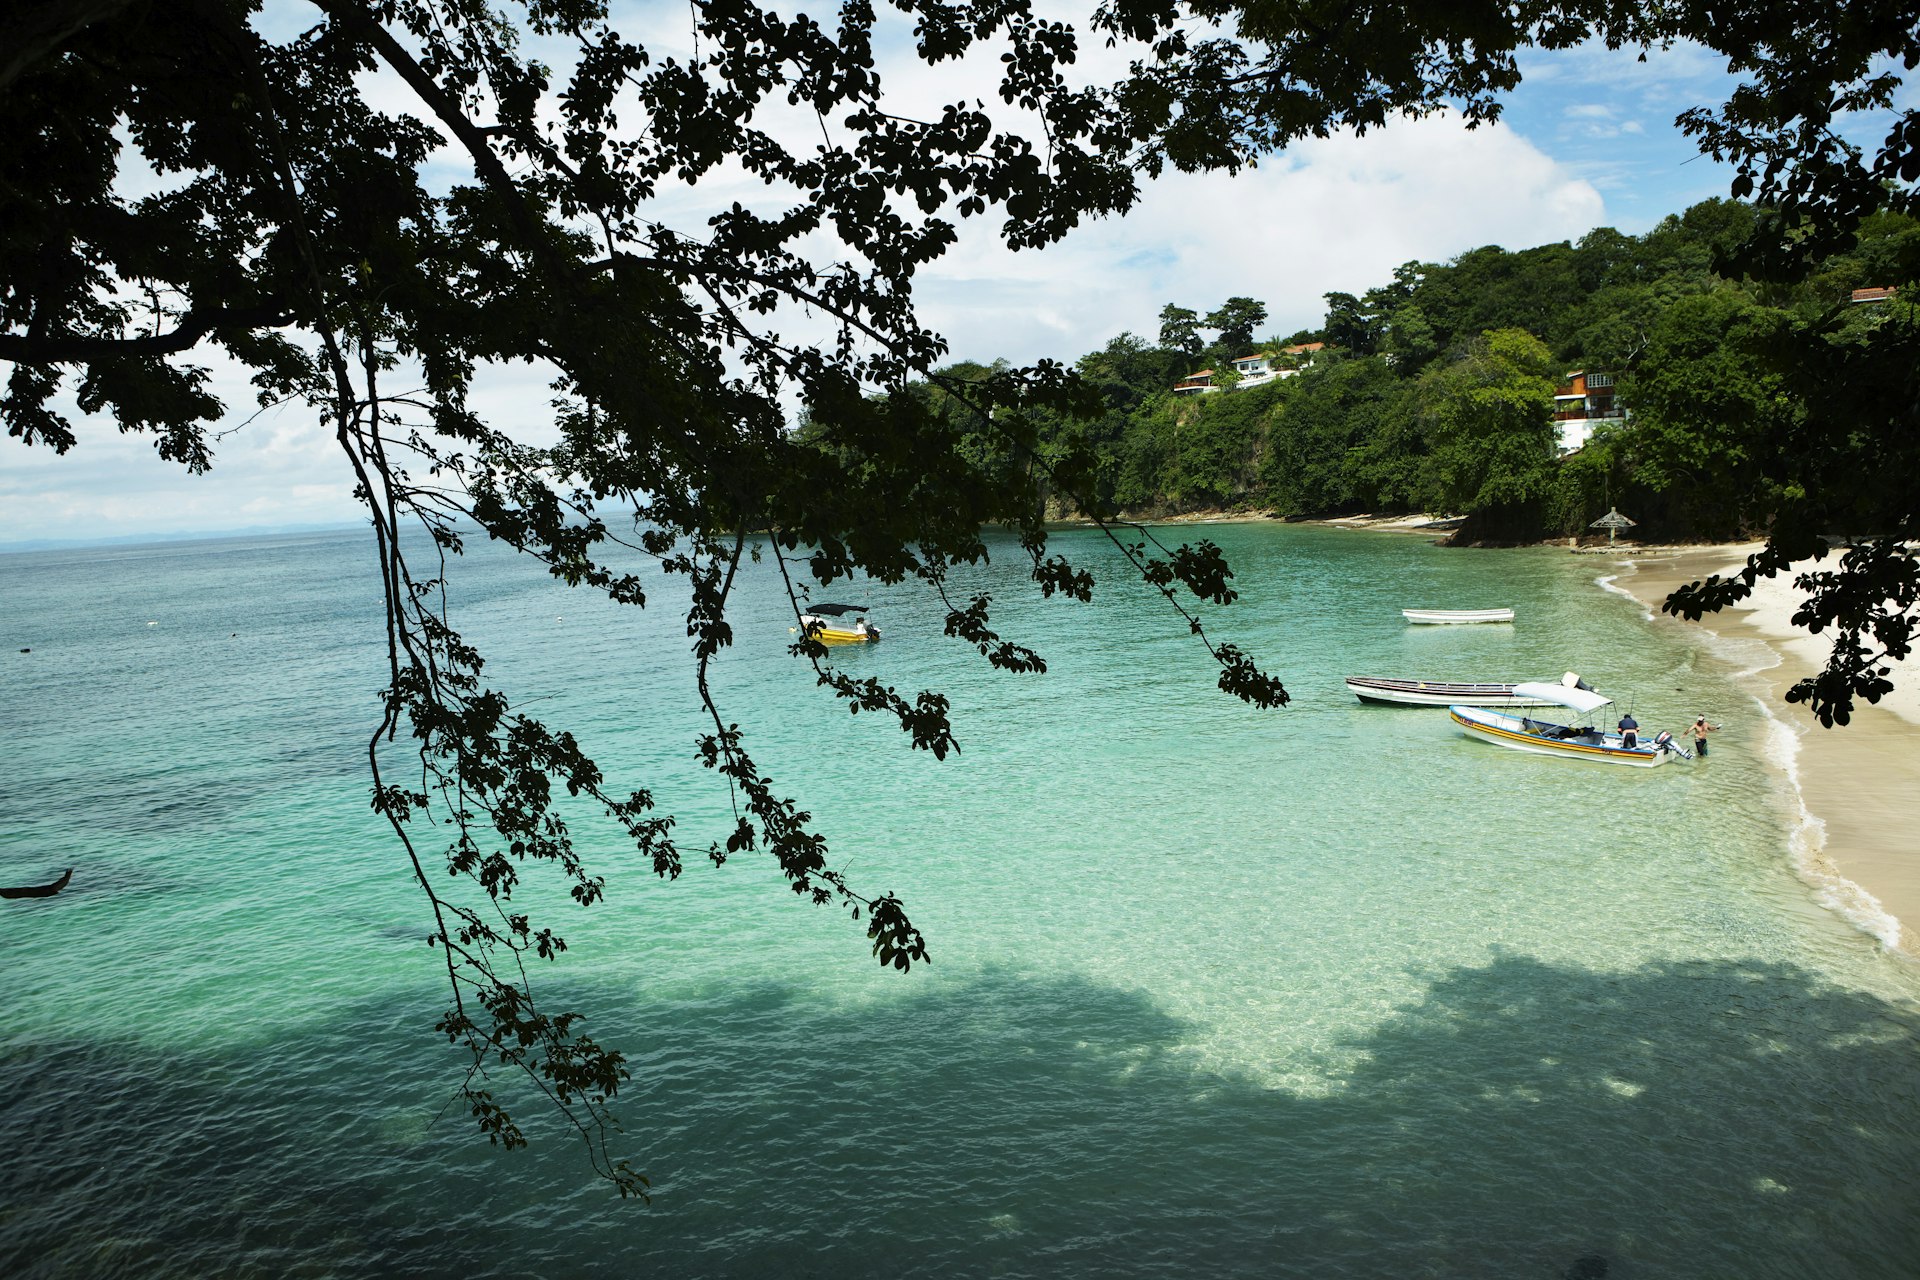 A view of Playa Galeon (Galleon Beach) on Isla Contadora. The shot is framed by leaves from a tree in the foreground. The beach has white sand and the turquoise waters are still and calm.